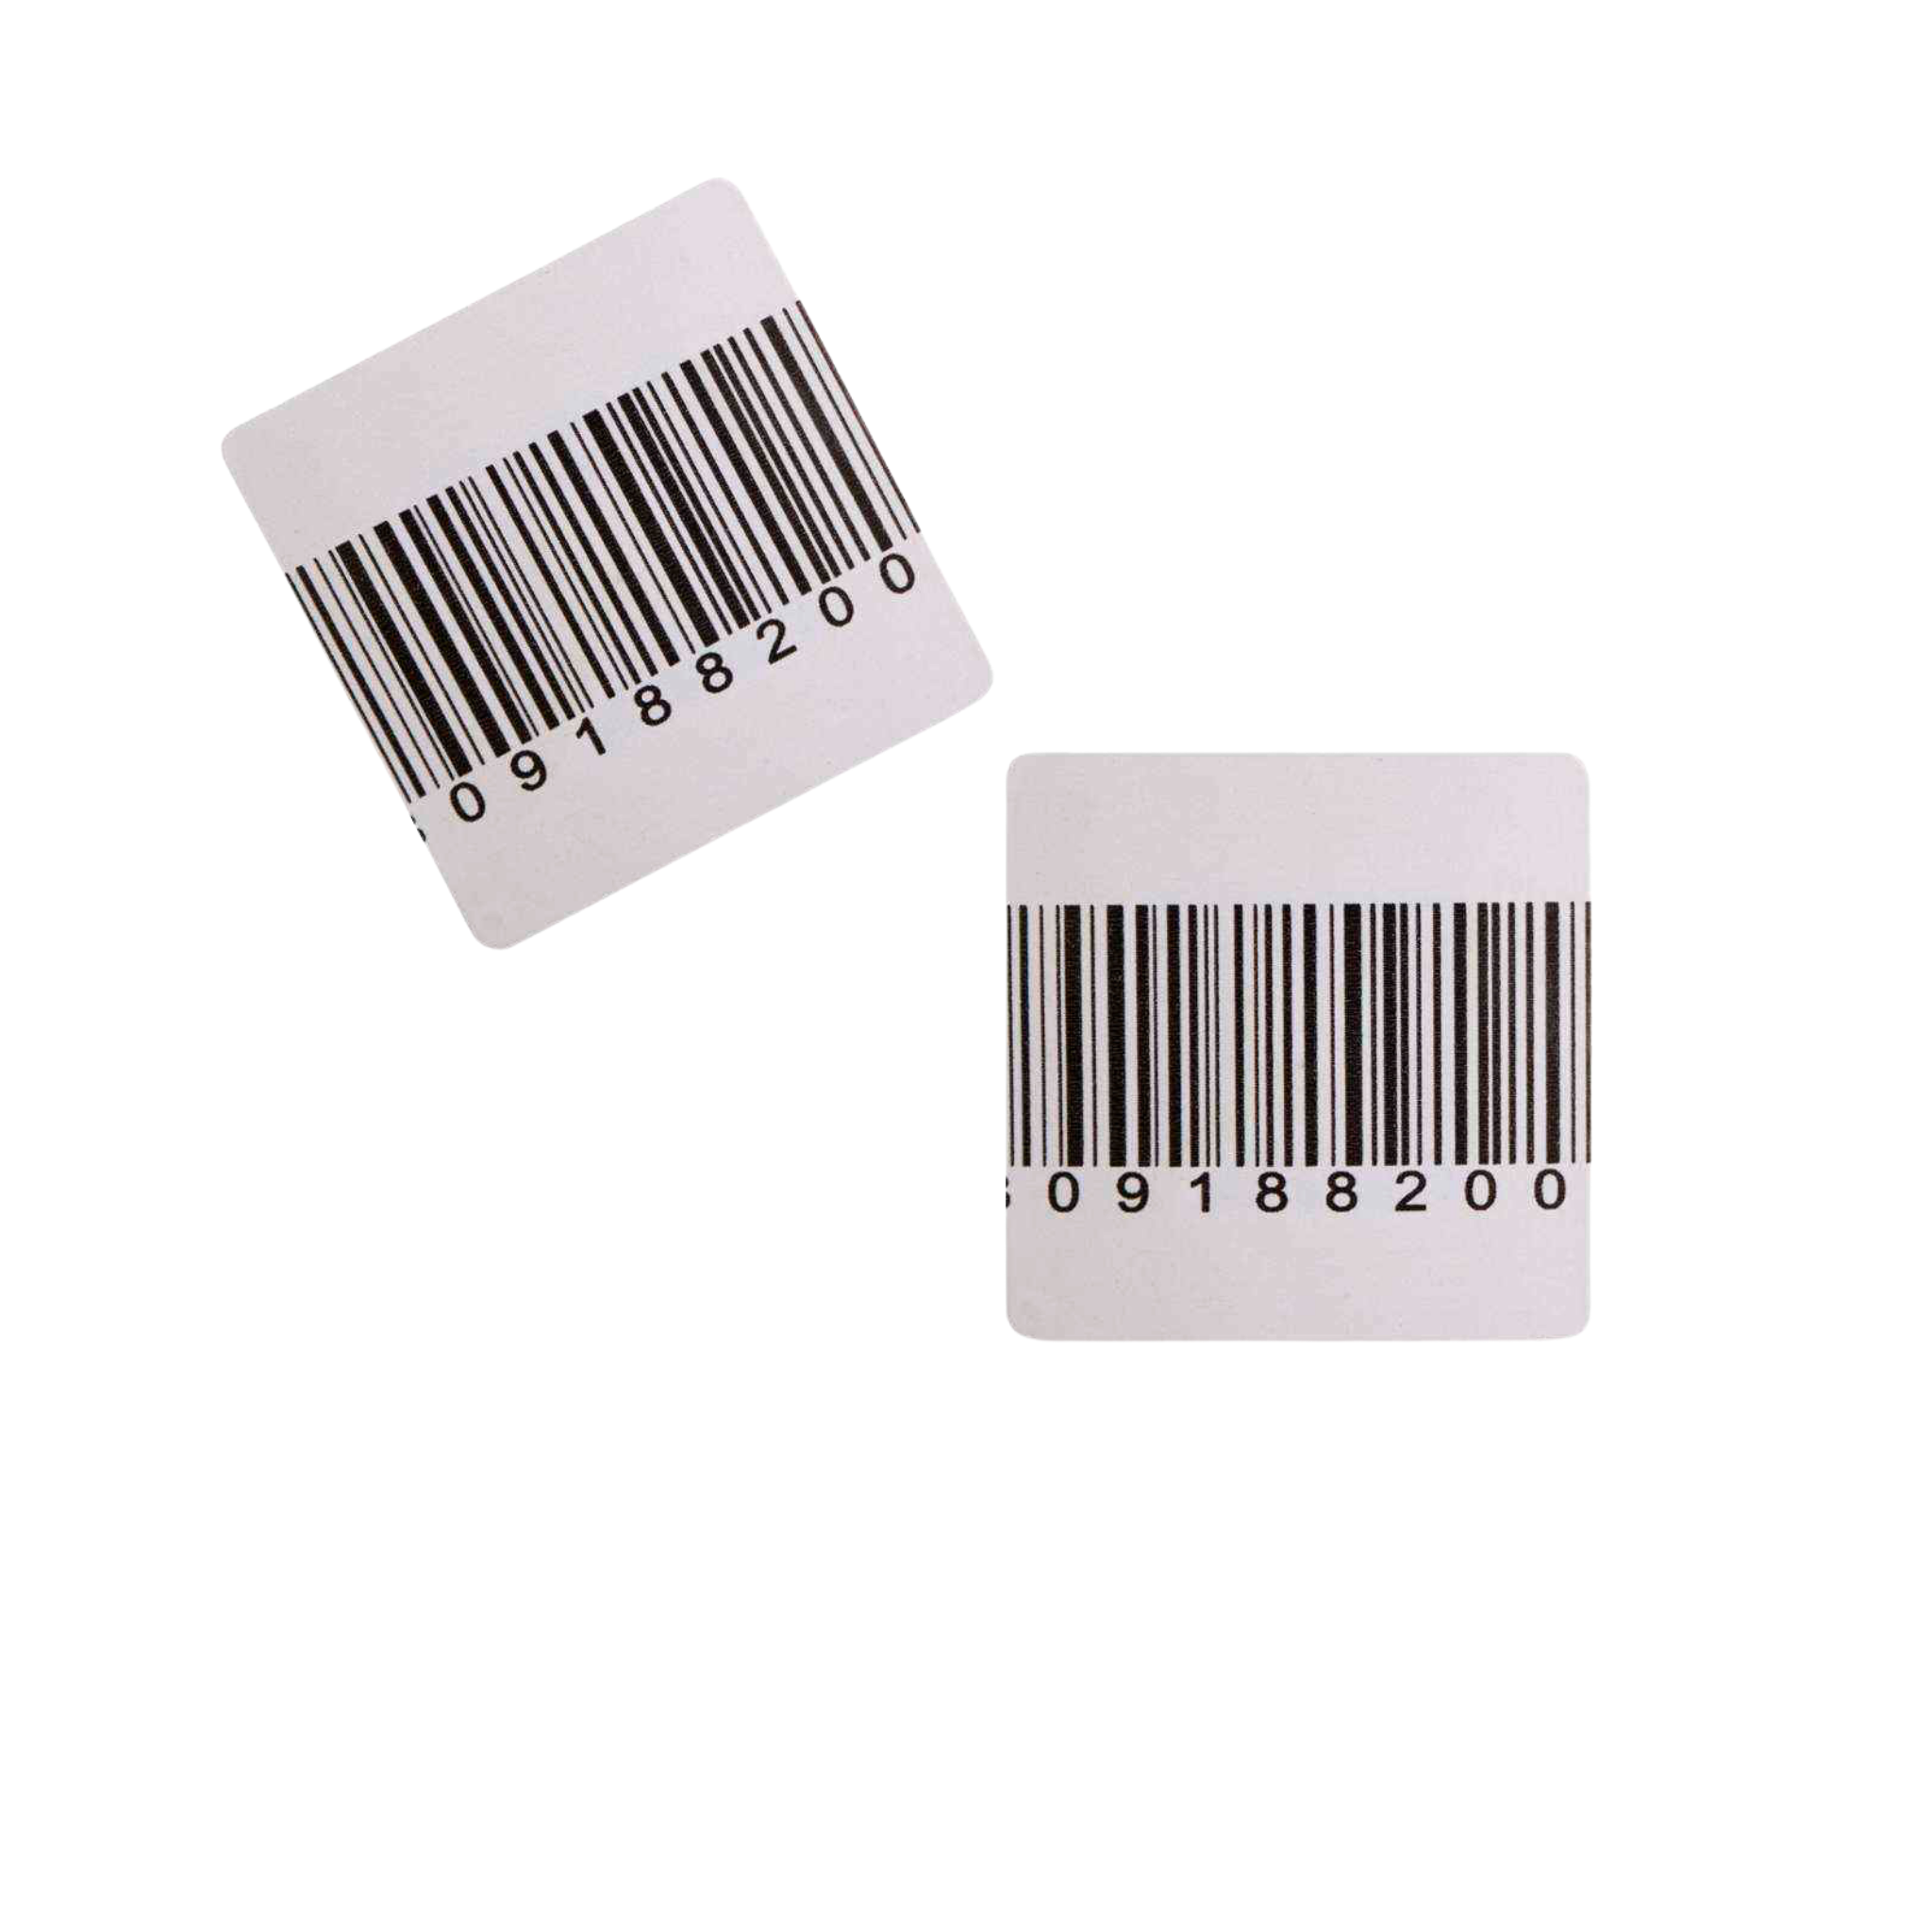 RF Labels 4x4 and 5x5 - Roll of 20,000 - TagShopUK